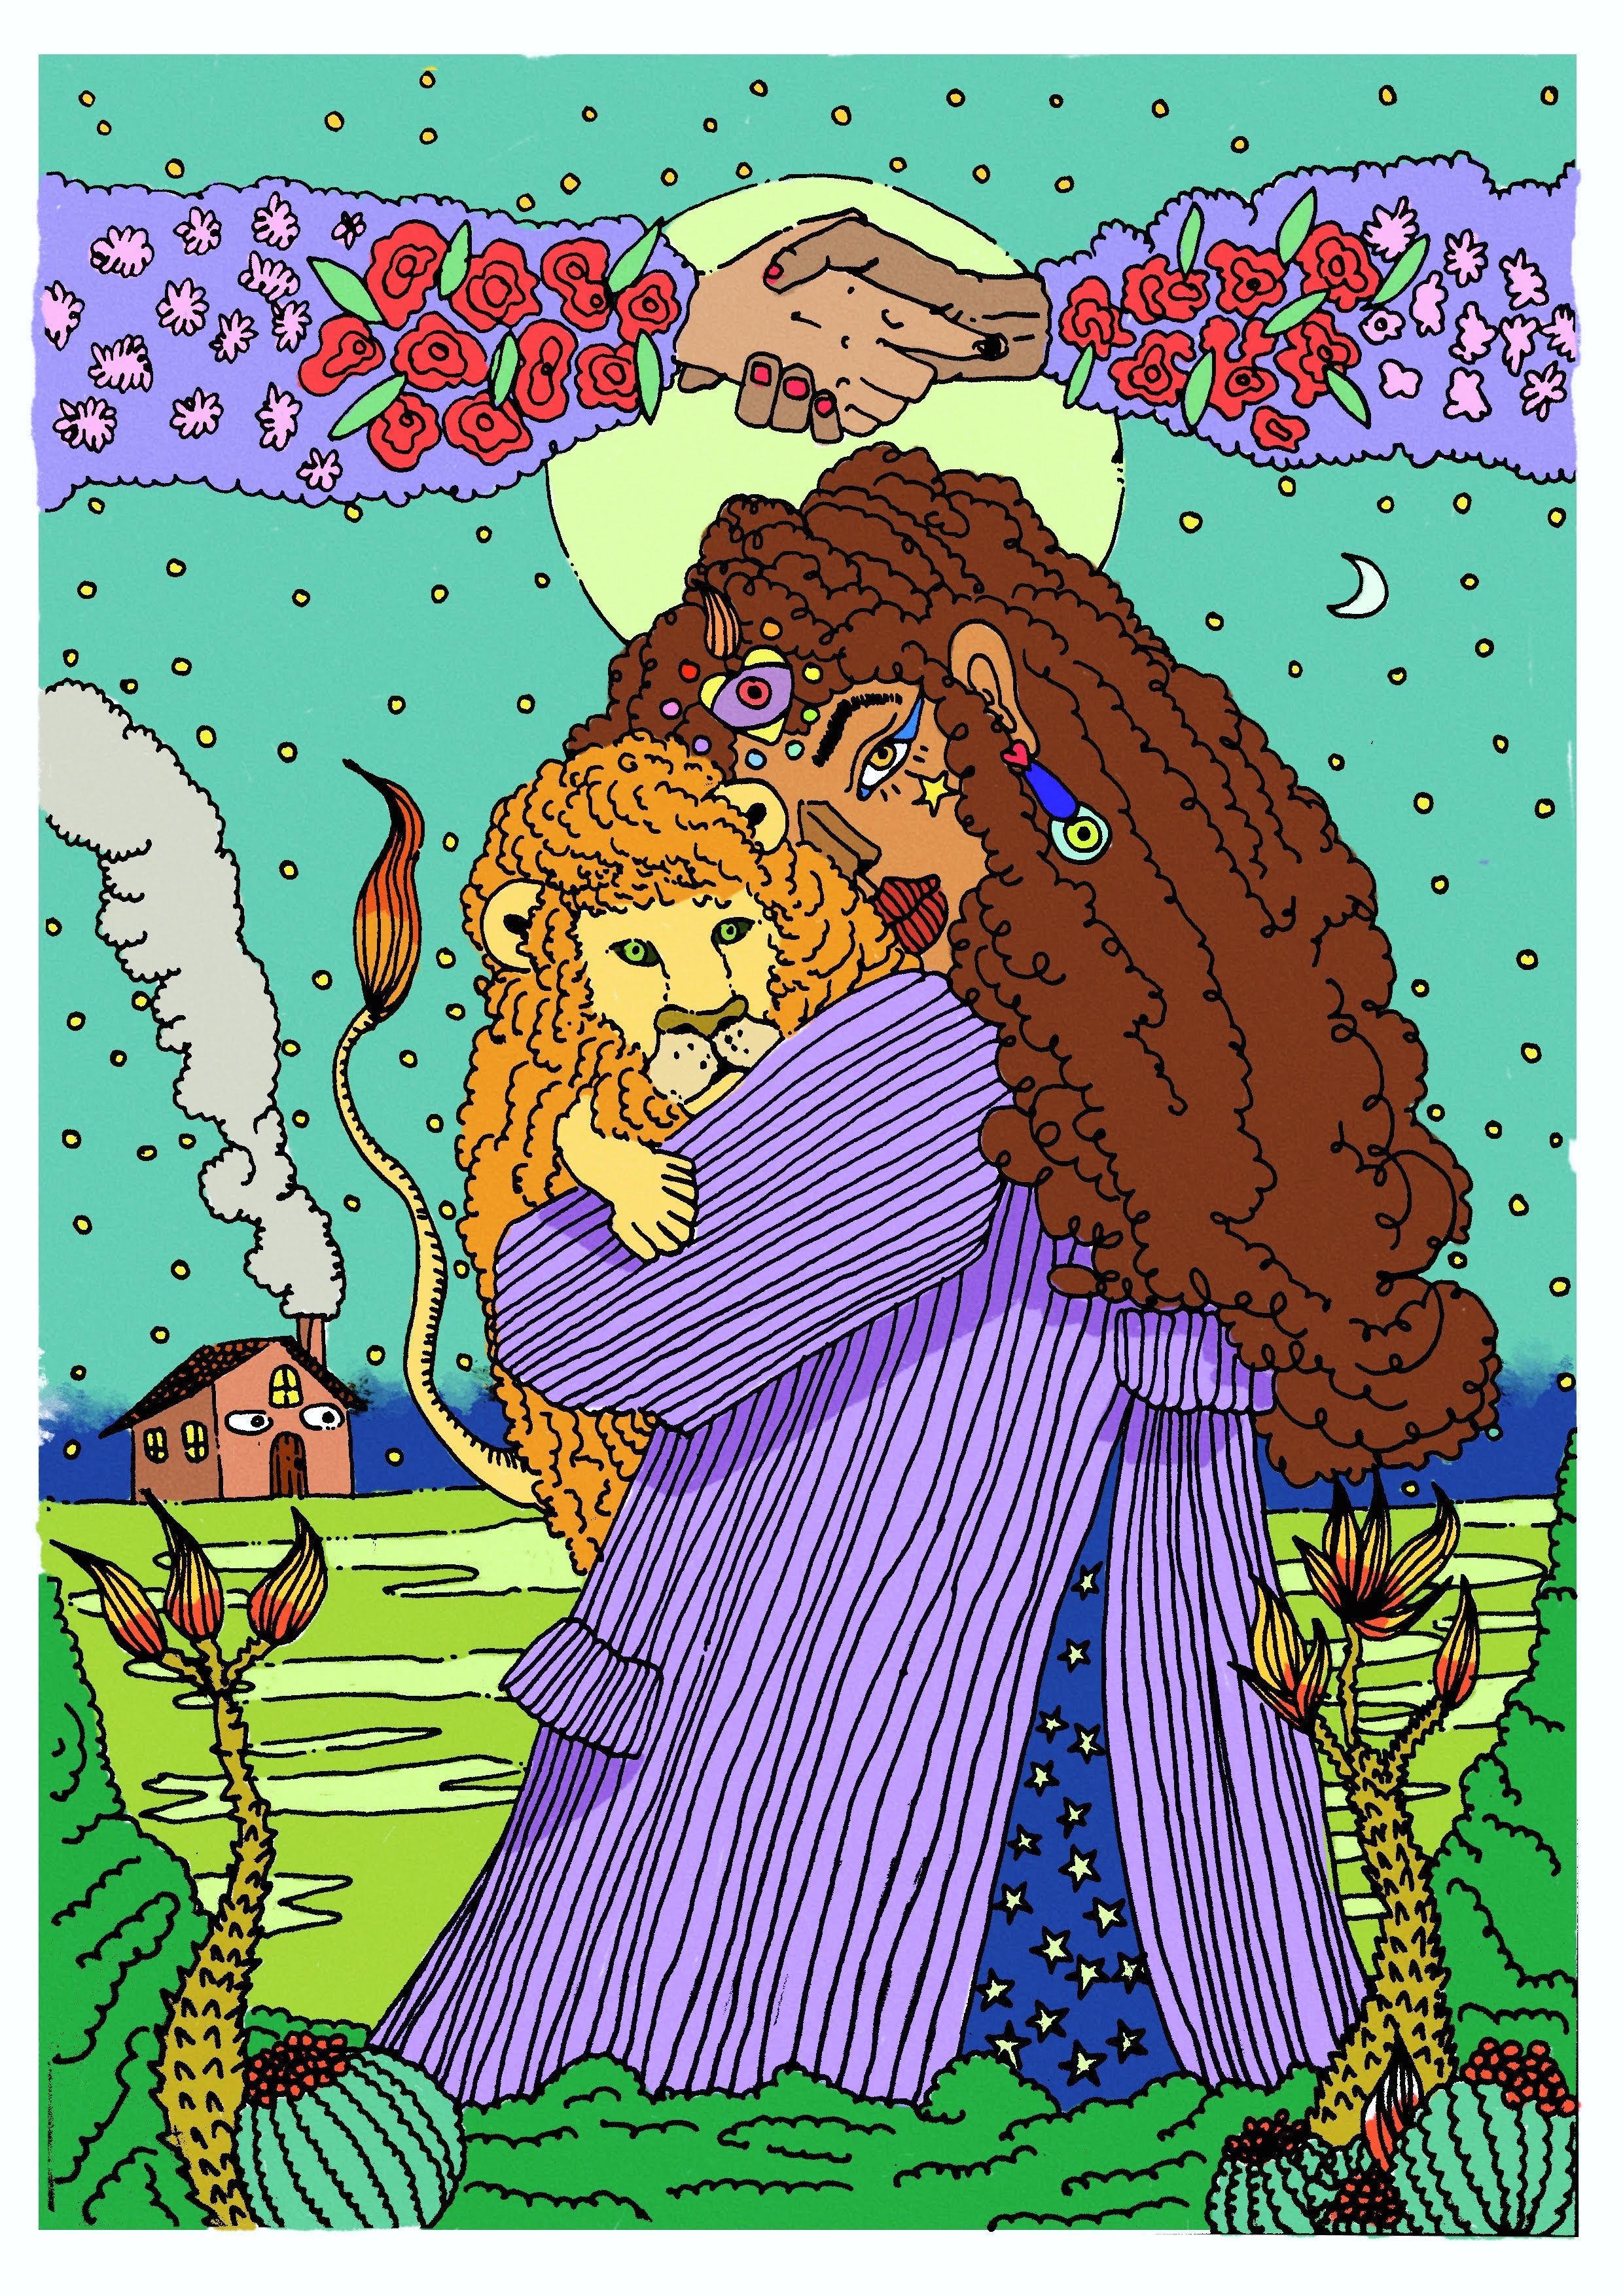 An illustration of a young Brown woman with long curly hair and adorned with jewelry pulls a lion close into her embrace.